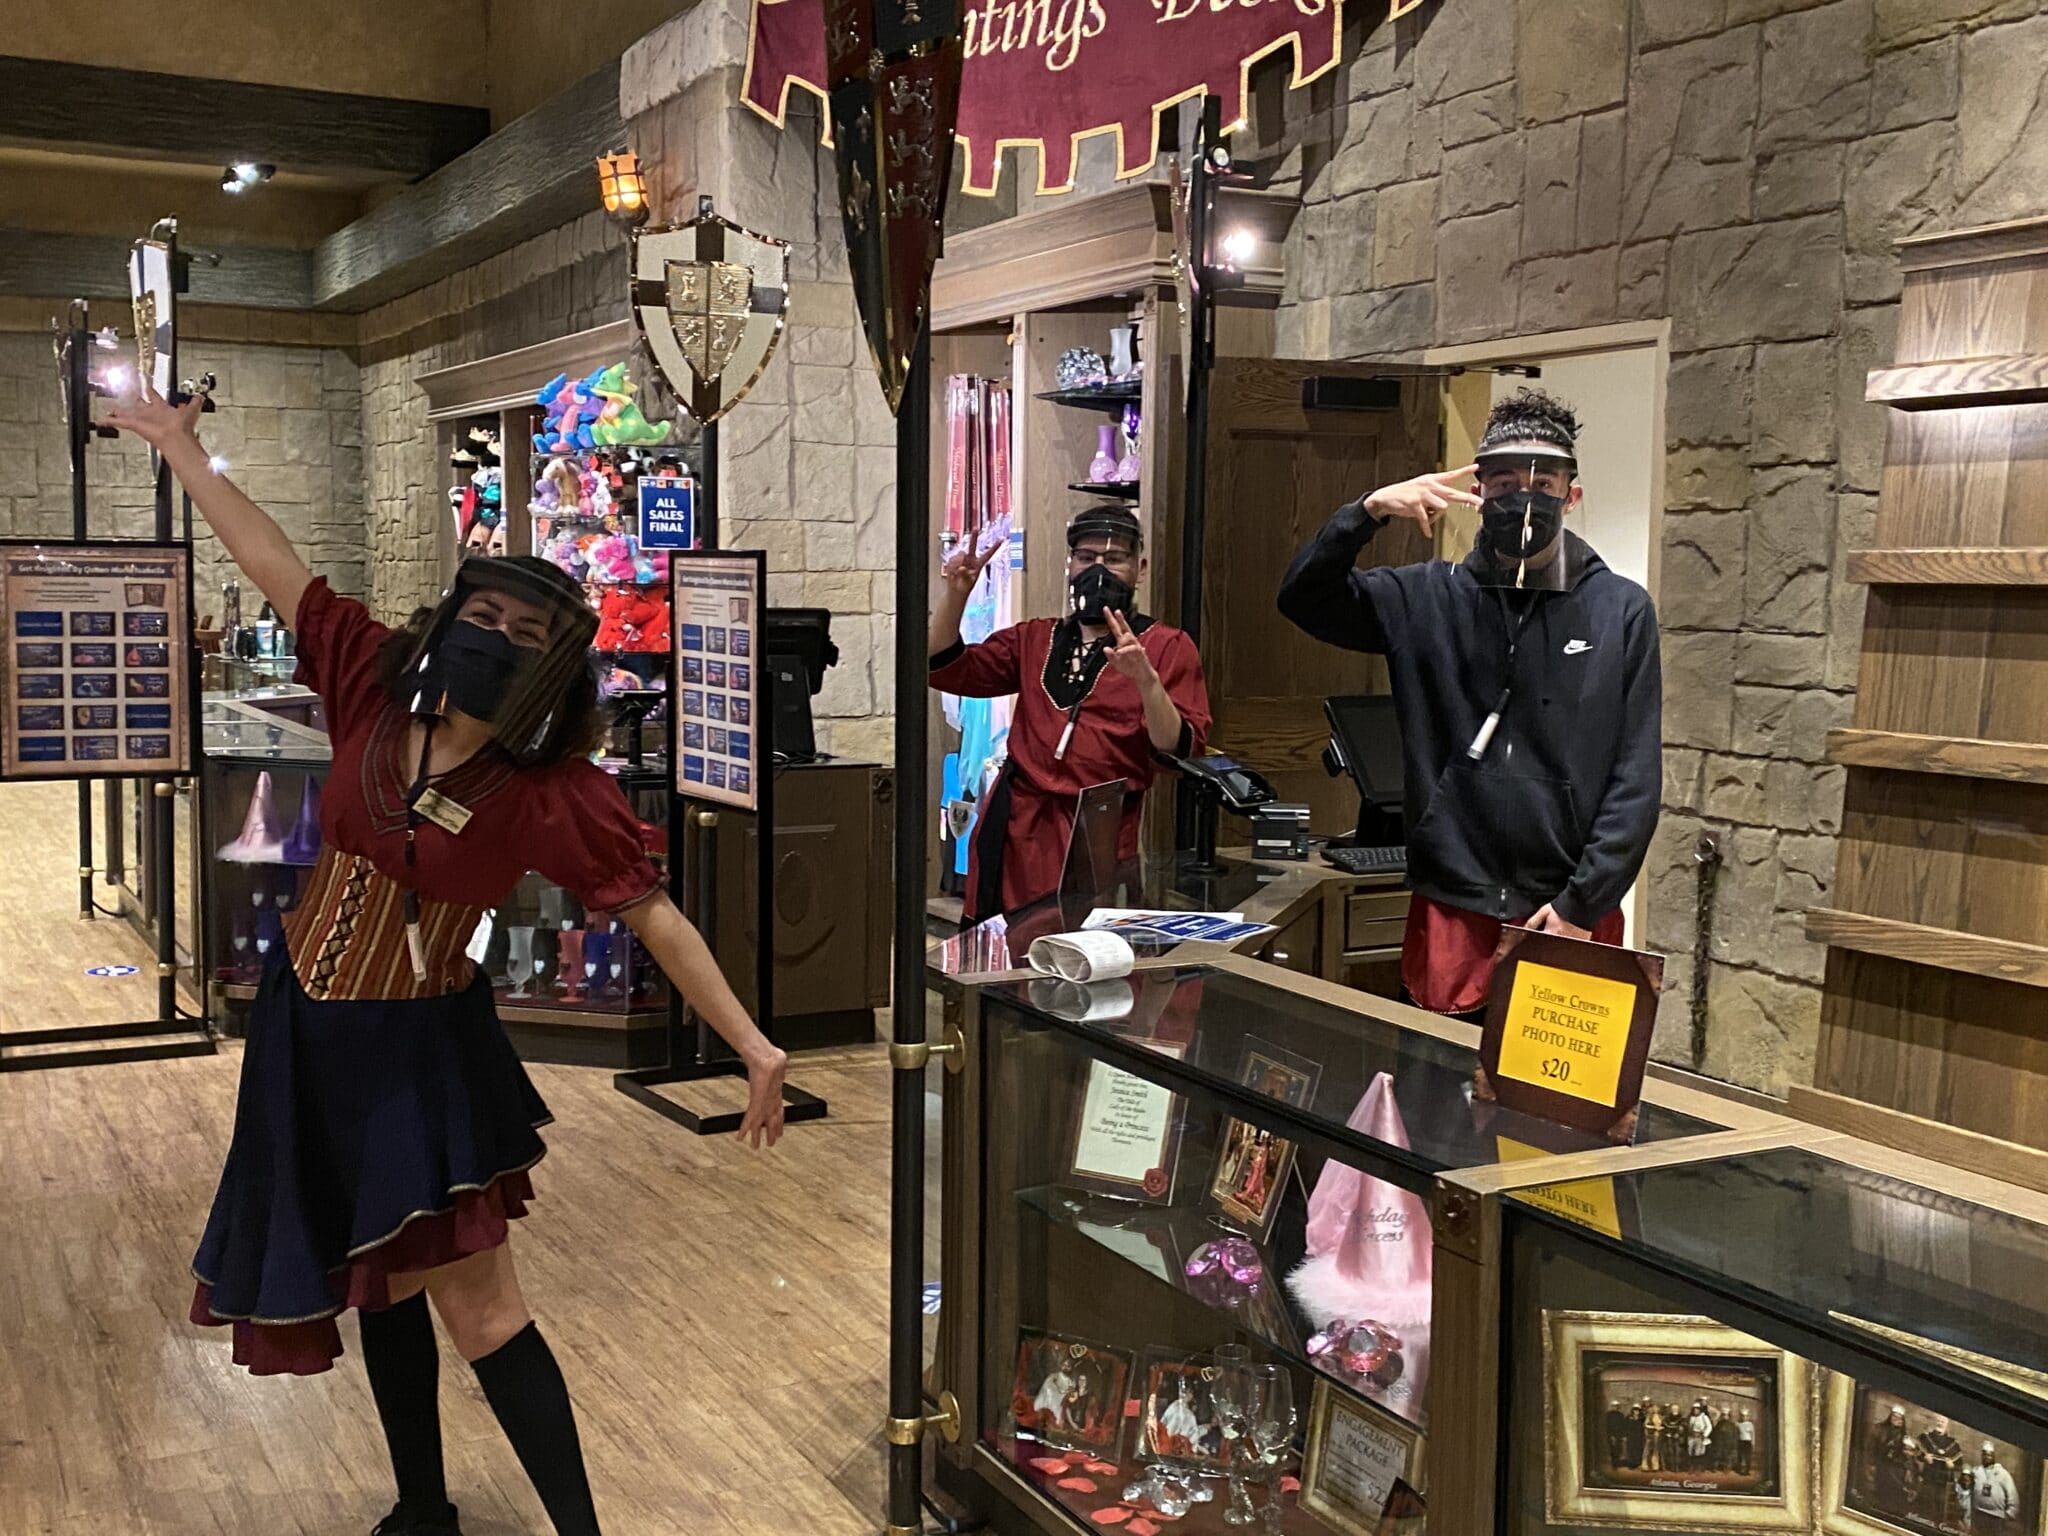 Medieval Times Myrtle Beach is currently in their safety-first reopening phase.